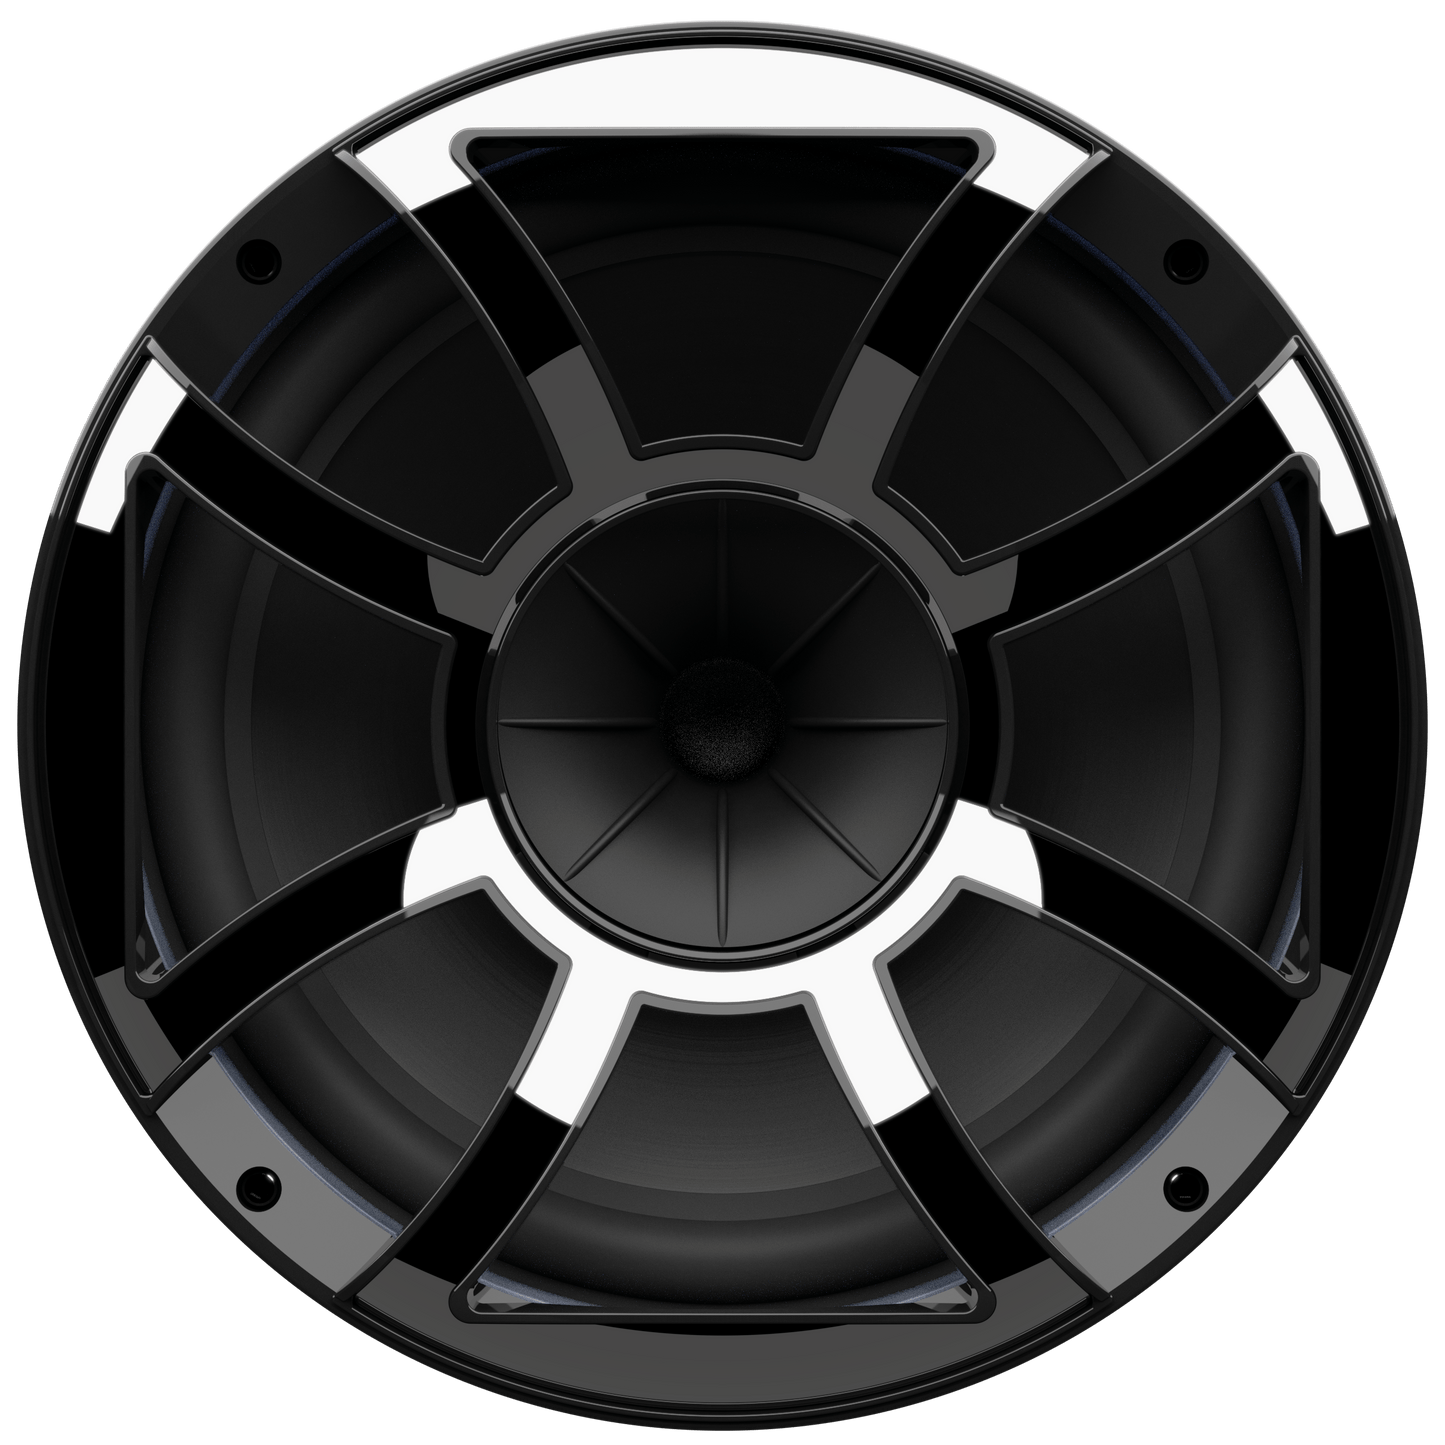 Wet Sounds Rev12 HD | High-Output 12" Wakeboard Tower Speakers